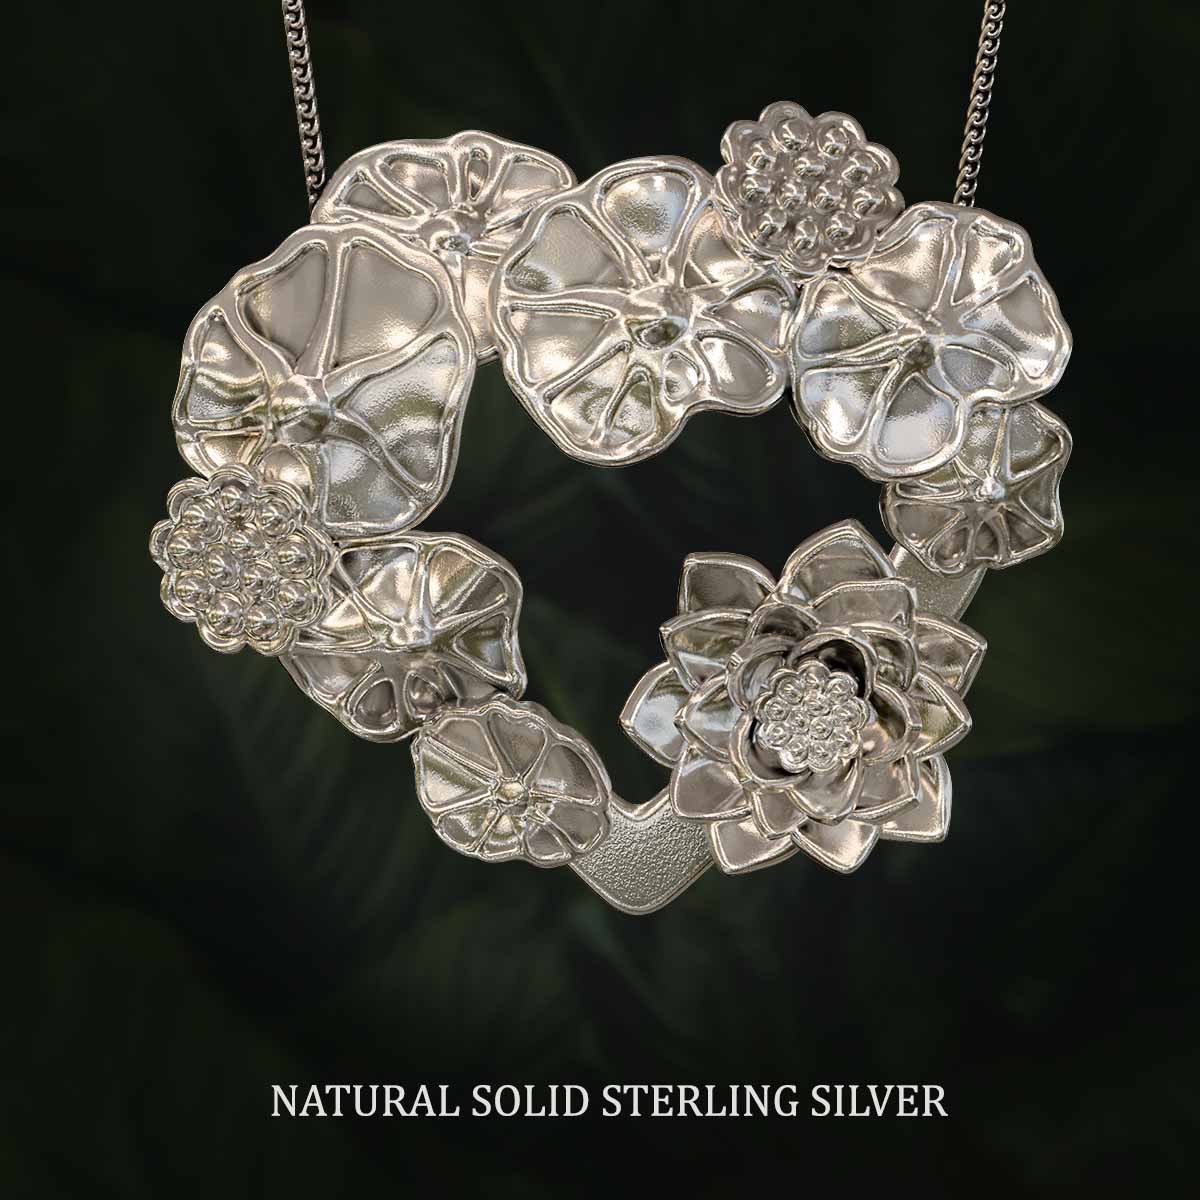 Natural-Satin-Polish-Solid-Sterling-Silver-Lotus-Leaves-with-Flower-and-Seed-Pods-Pendant-Jewelry-For-Necklace